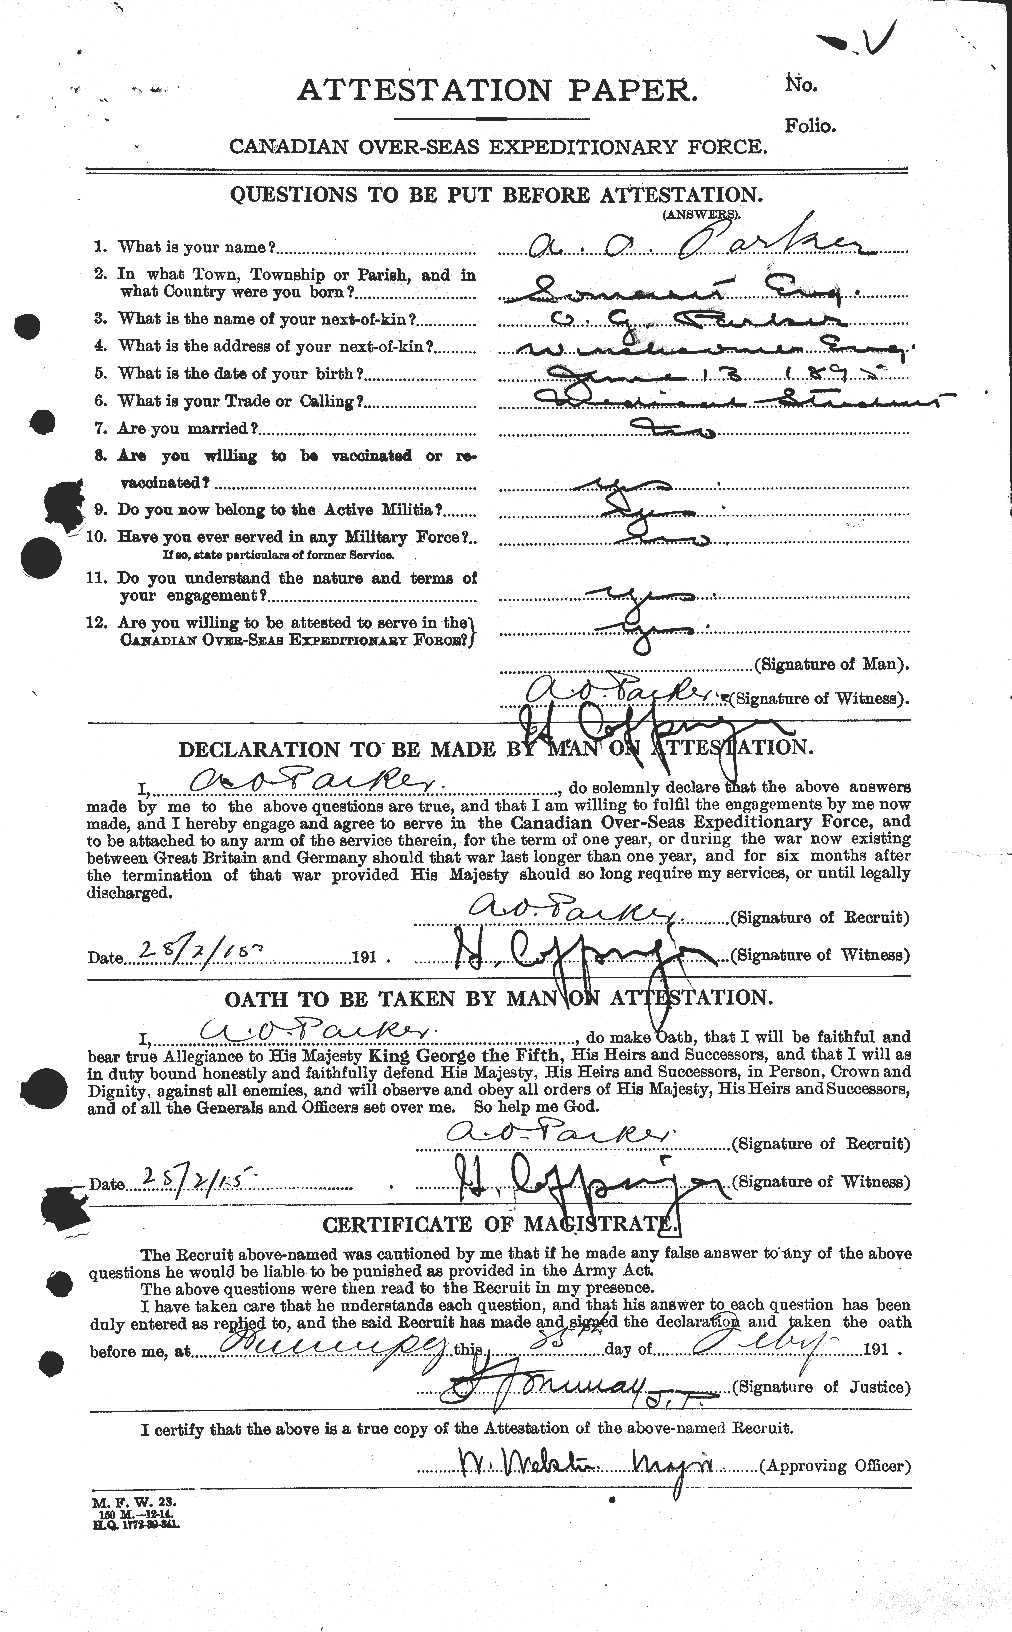 Personnel Records of the First World War - CEF 564953a